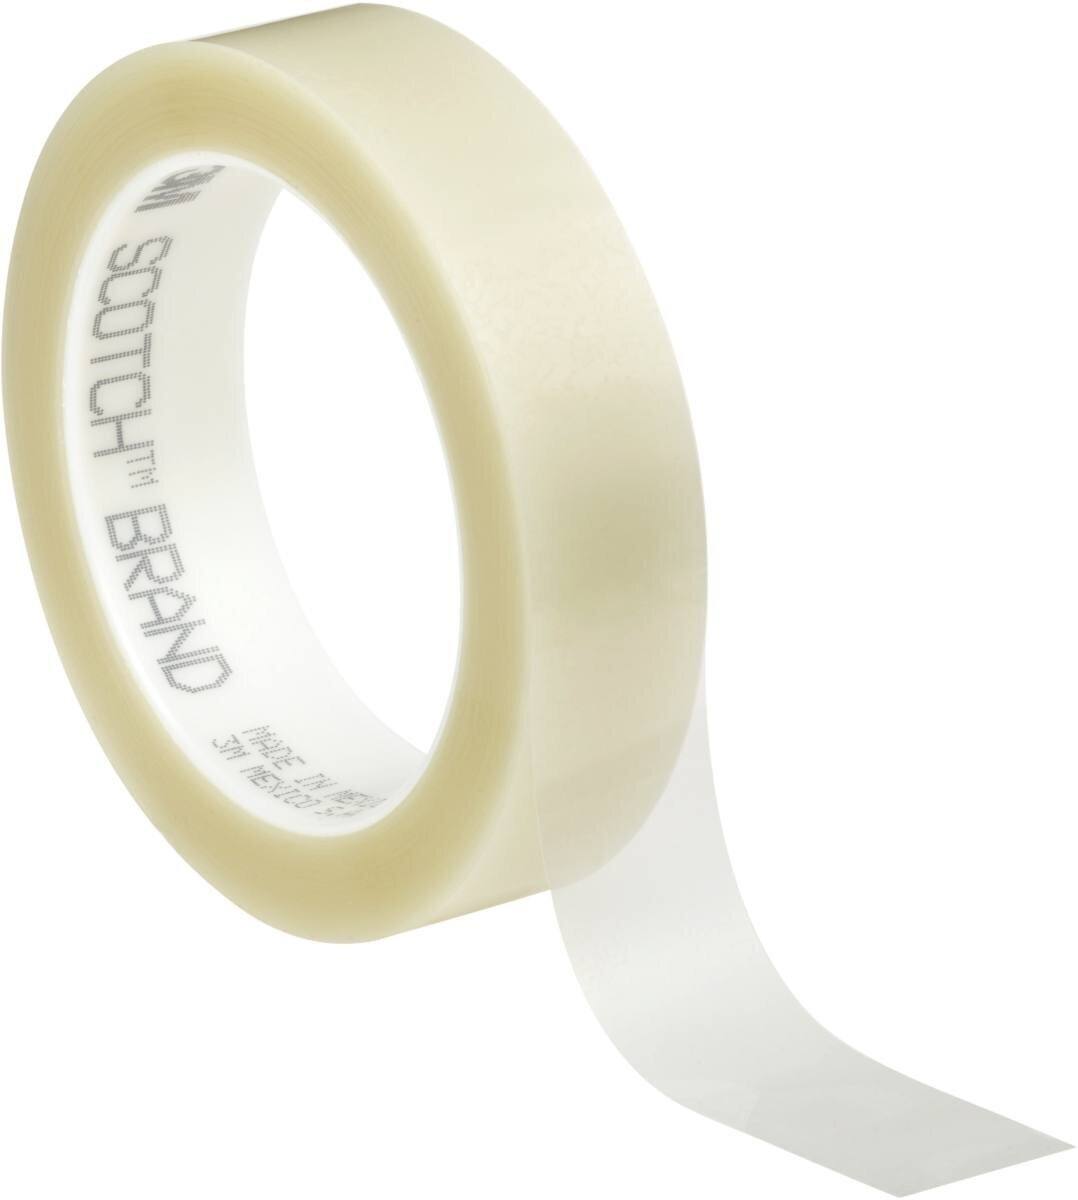 3M polyester adhesive tape 853, transparent, 305 mm x 66 m, 0.06 mm